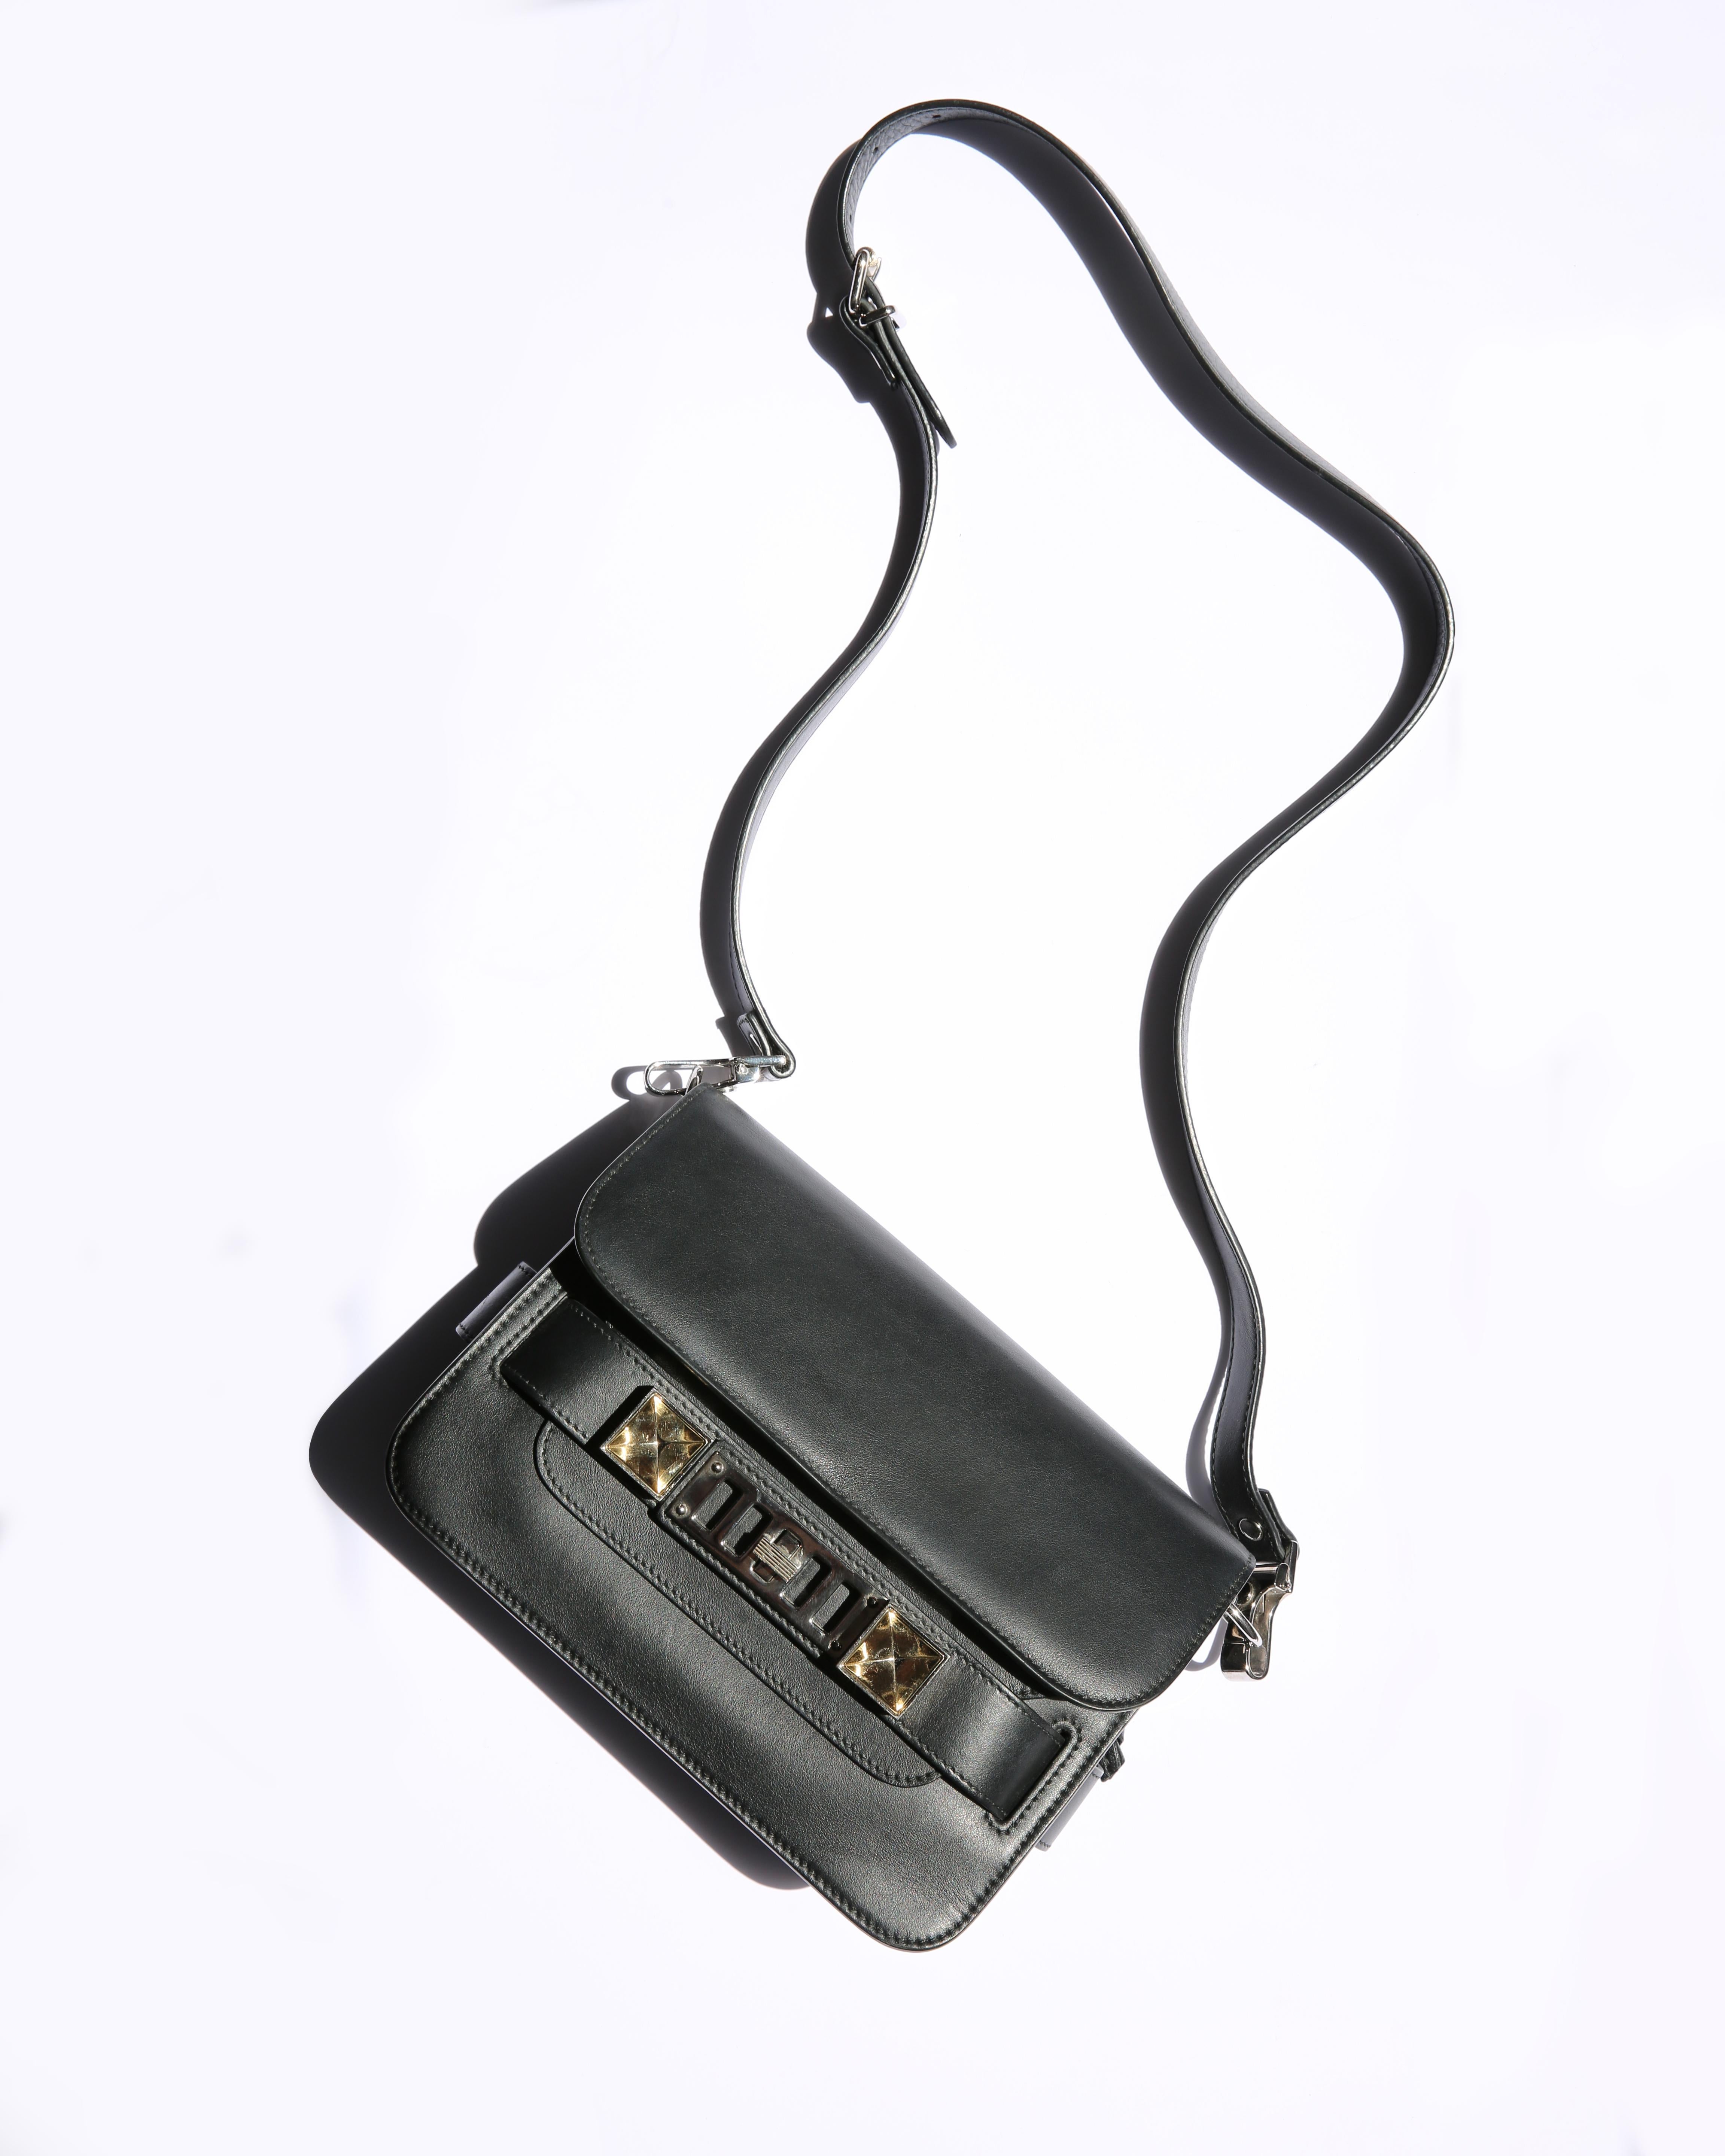 Proenza Schouler PS11 mini classic shoulder bag
Detachable strap means this can be worn as a clutch
Black smooth leather
Boxy style bag with a metallic pate and twist lock fastening to its front that is accented with silver tone stud detailing 
Calf